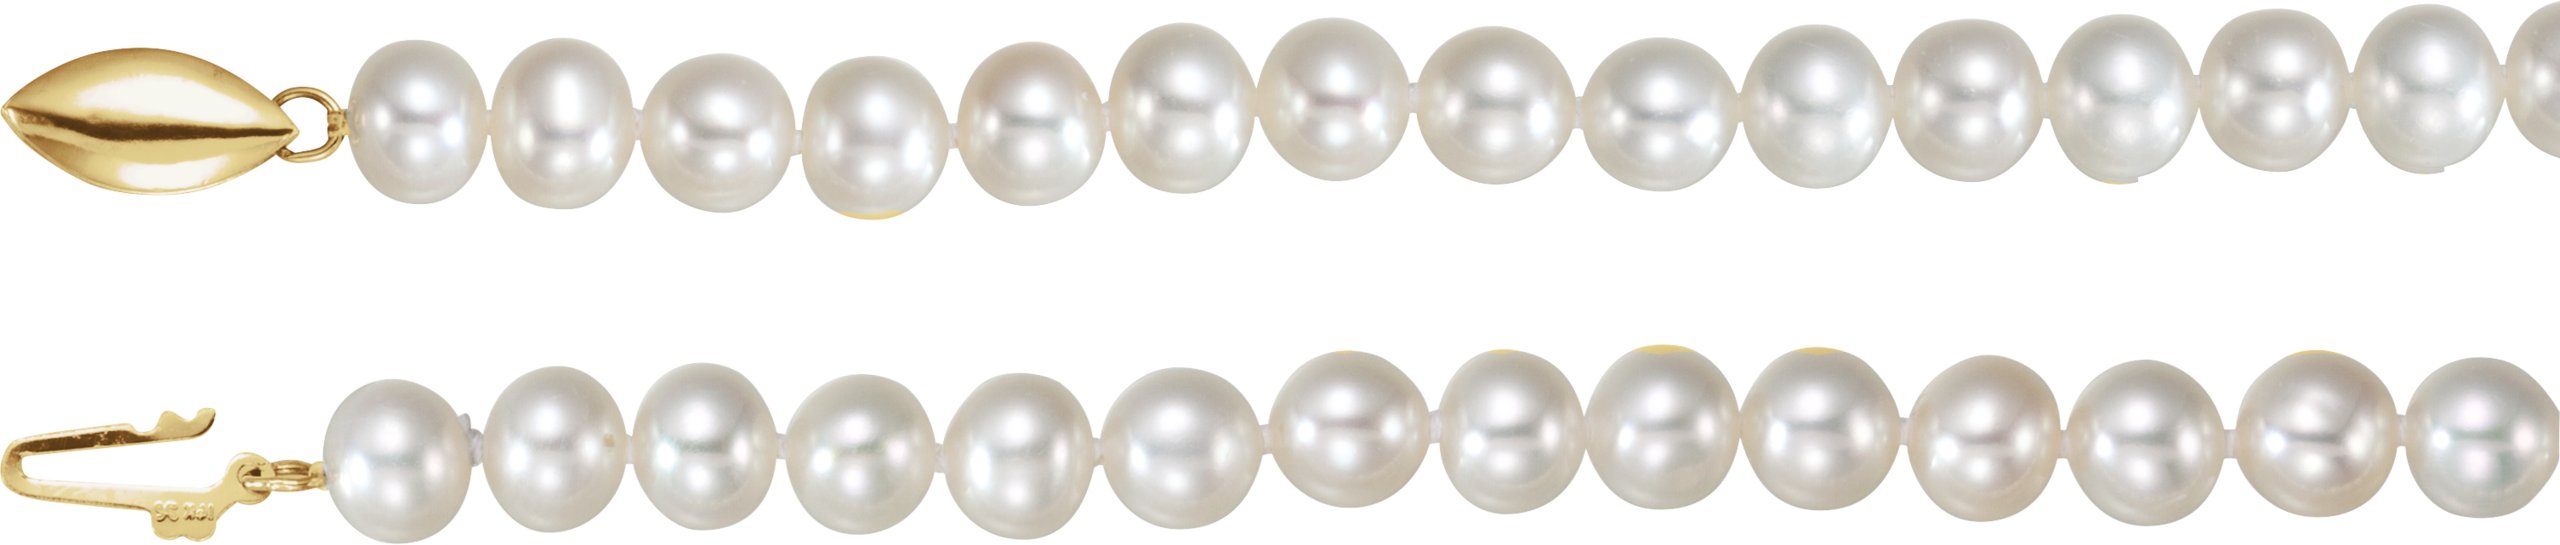 Panache Freshwater Cultured Pearl Strand 18 inch 6.5 to 7mm Ref 963463